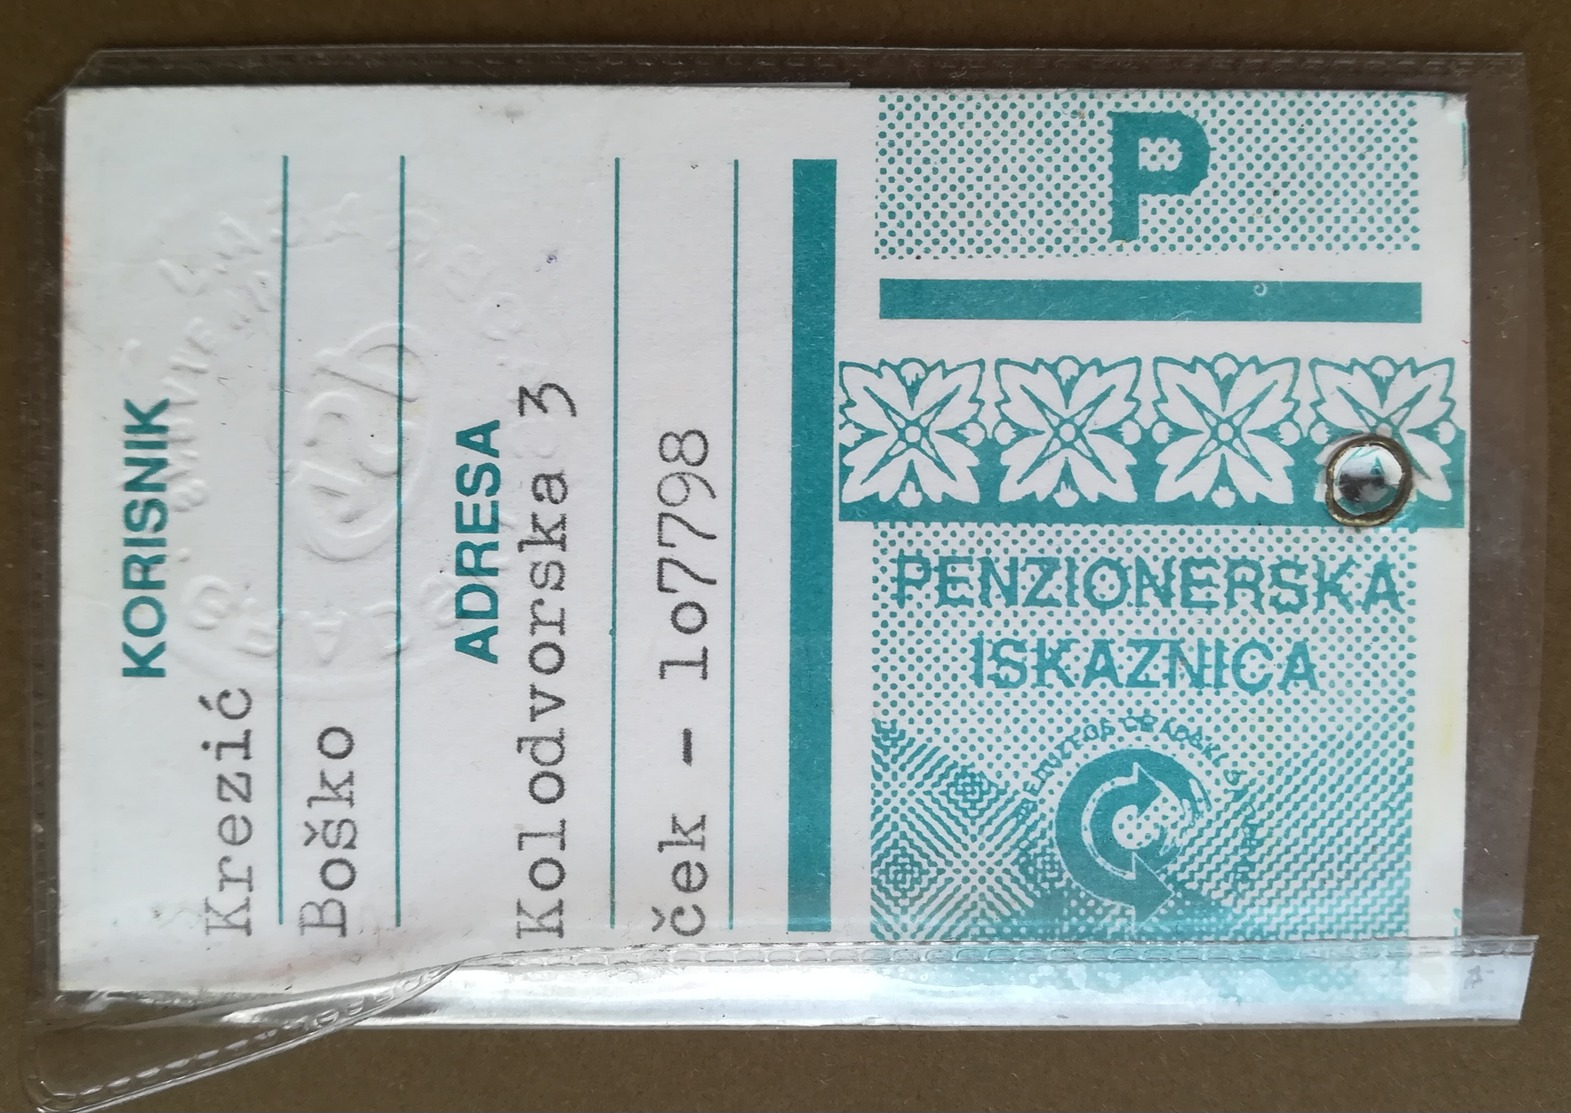 BOSNIA AND HERZEGOVINA Male Annual Public Transport Ticket For Retired People - Europe